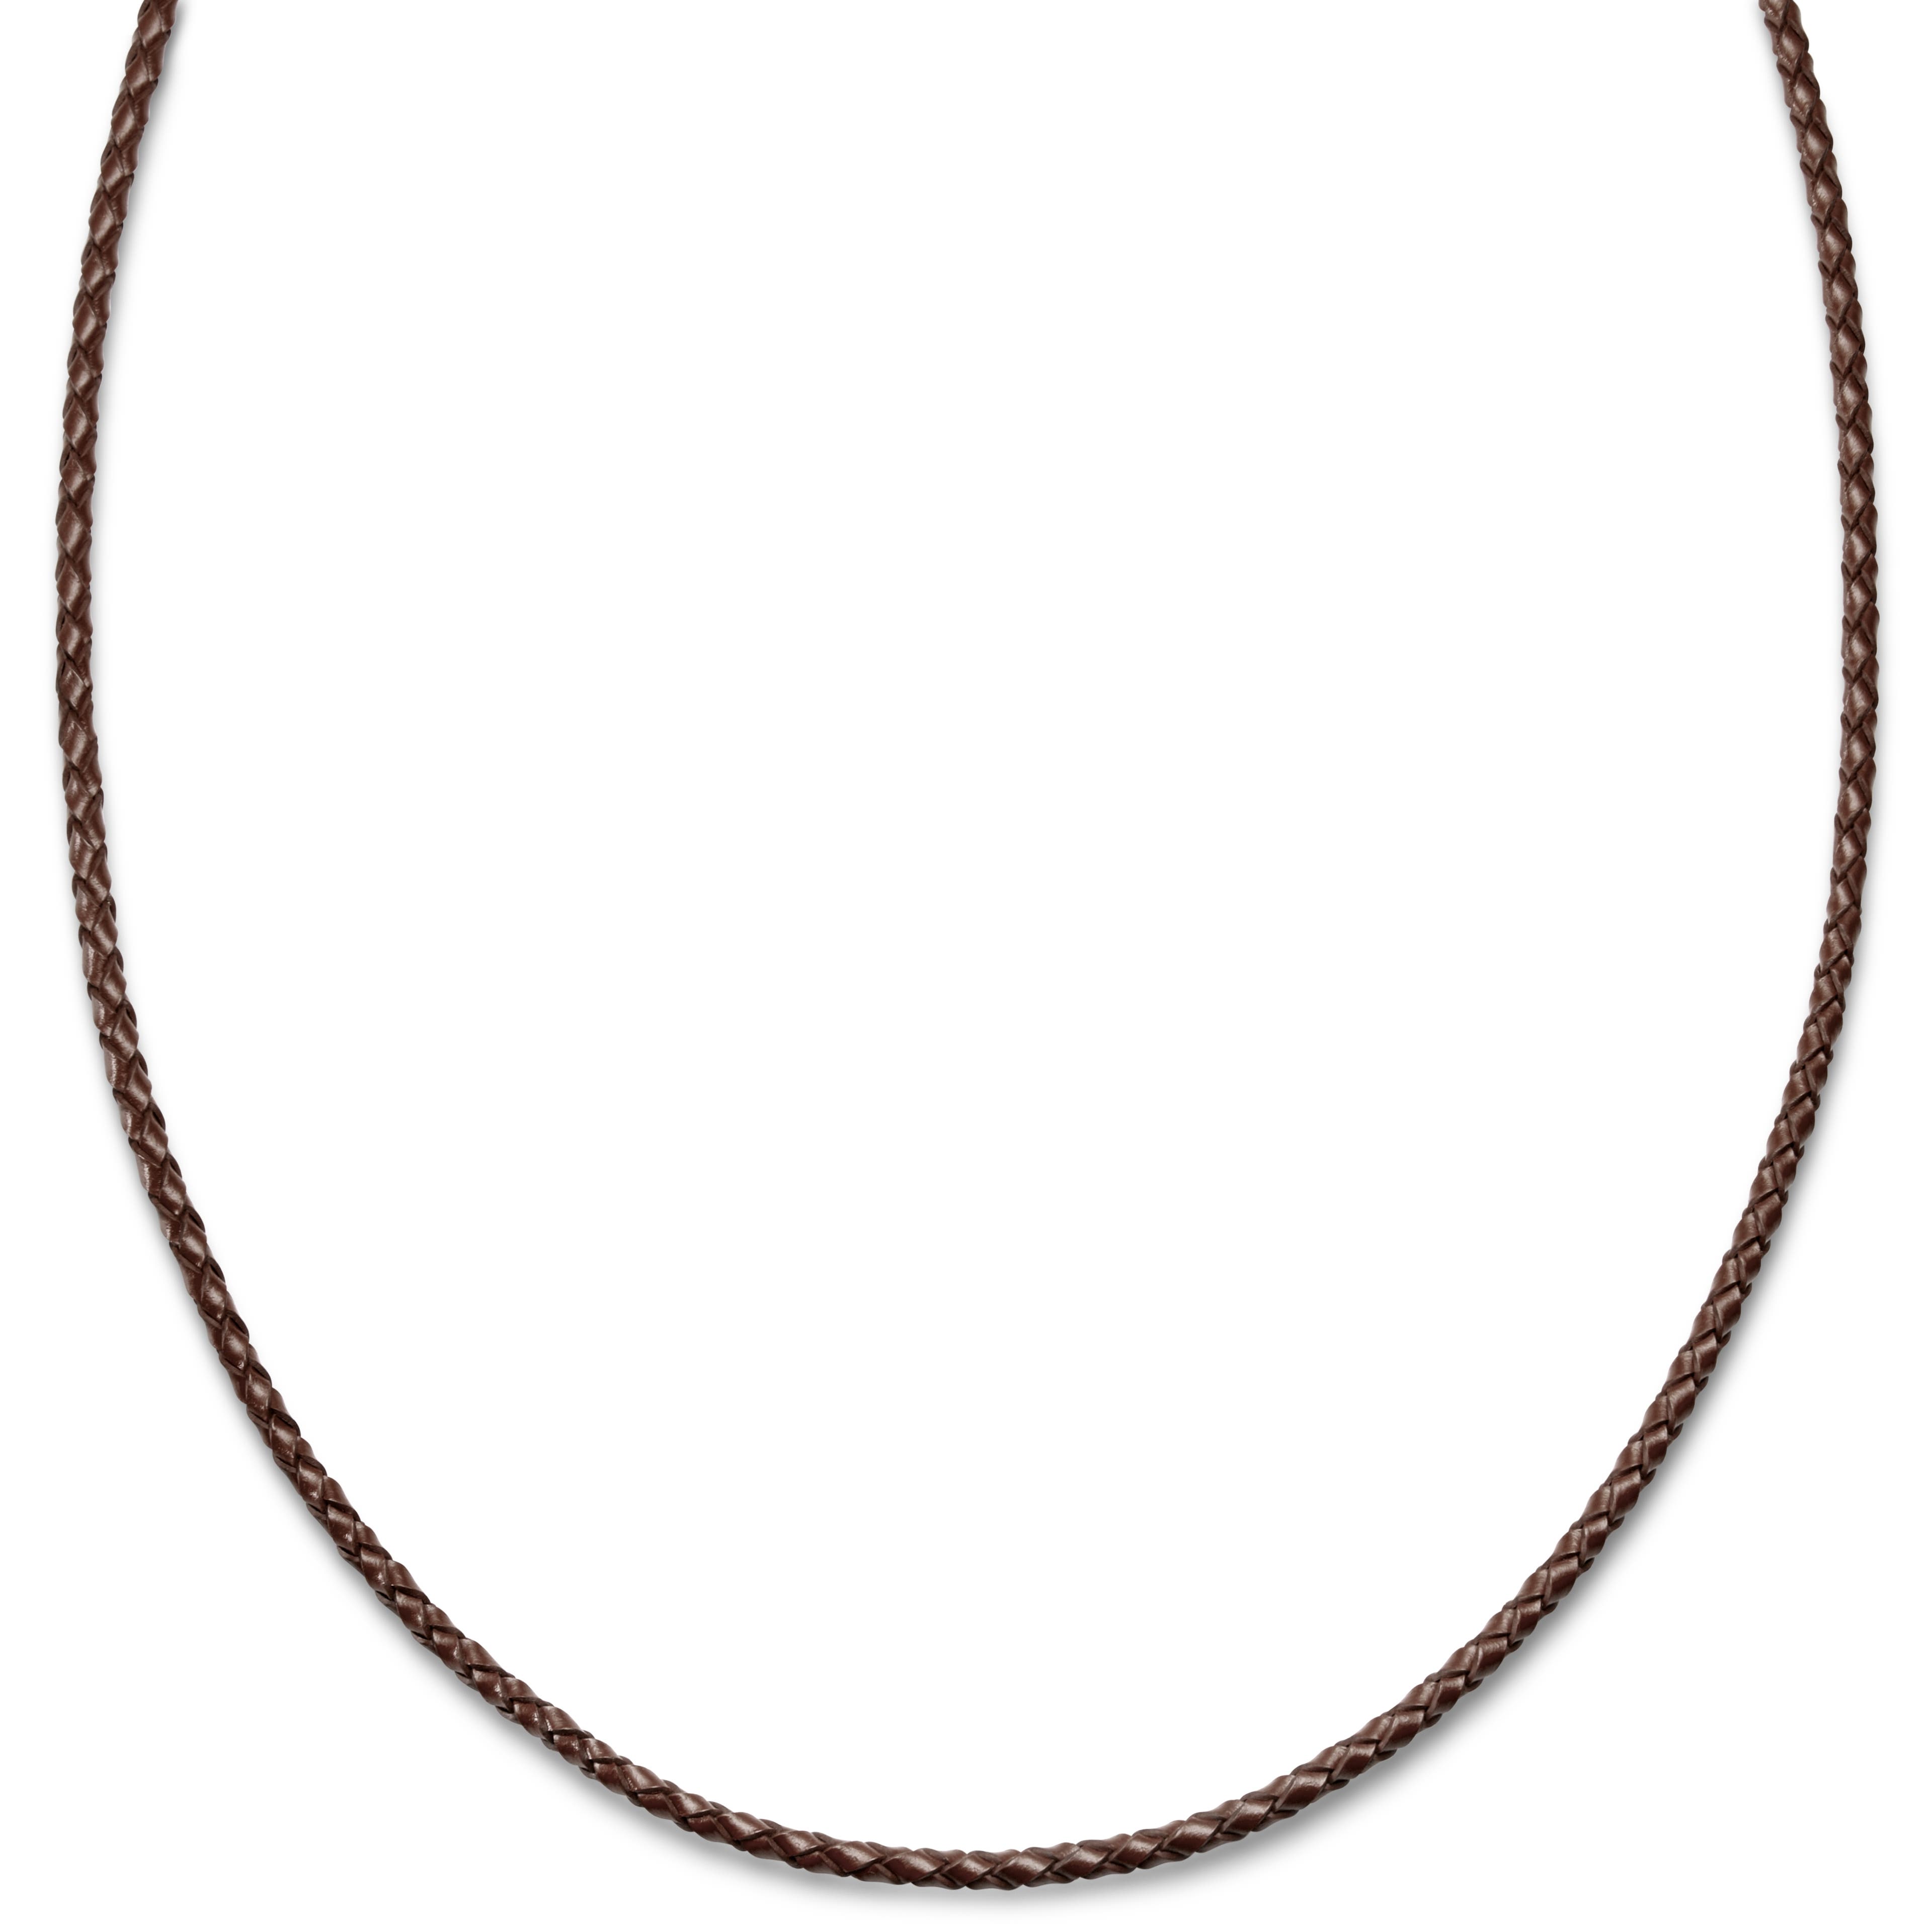 Tenvis | 1/8" (3 mm) Brown Leather Necklace